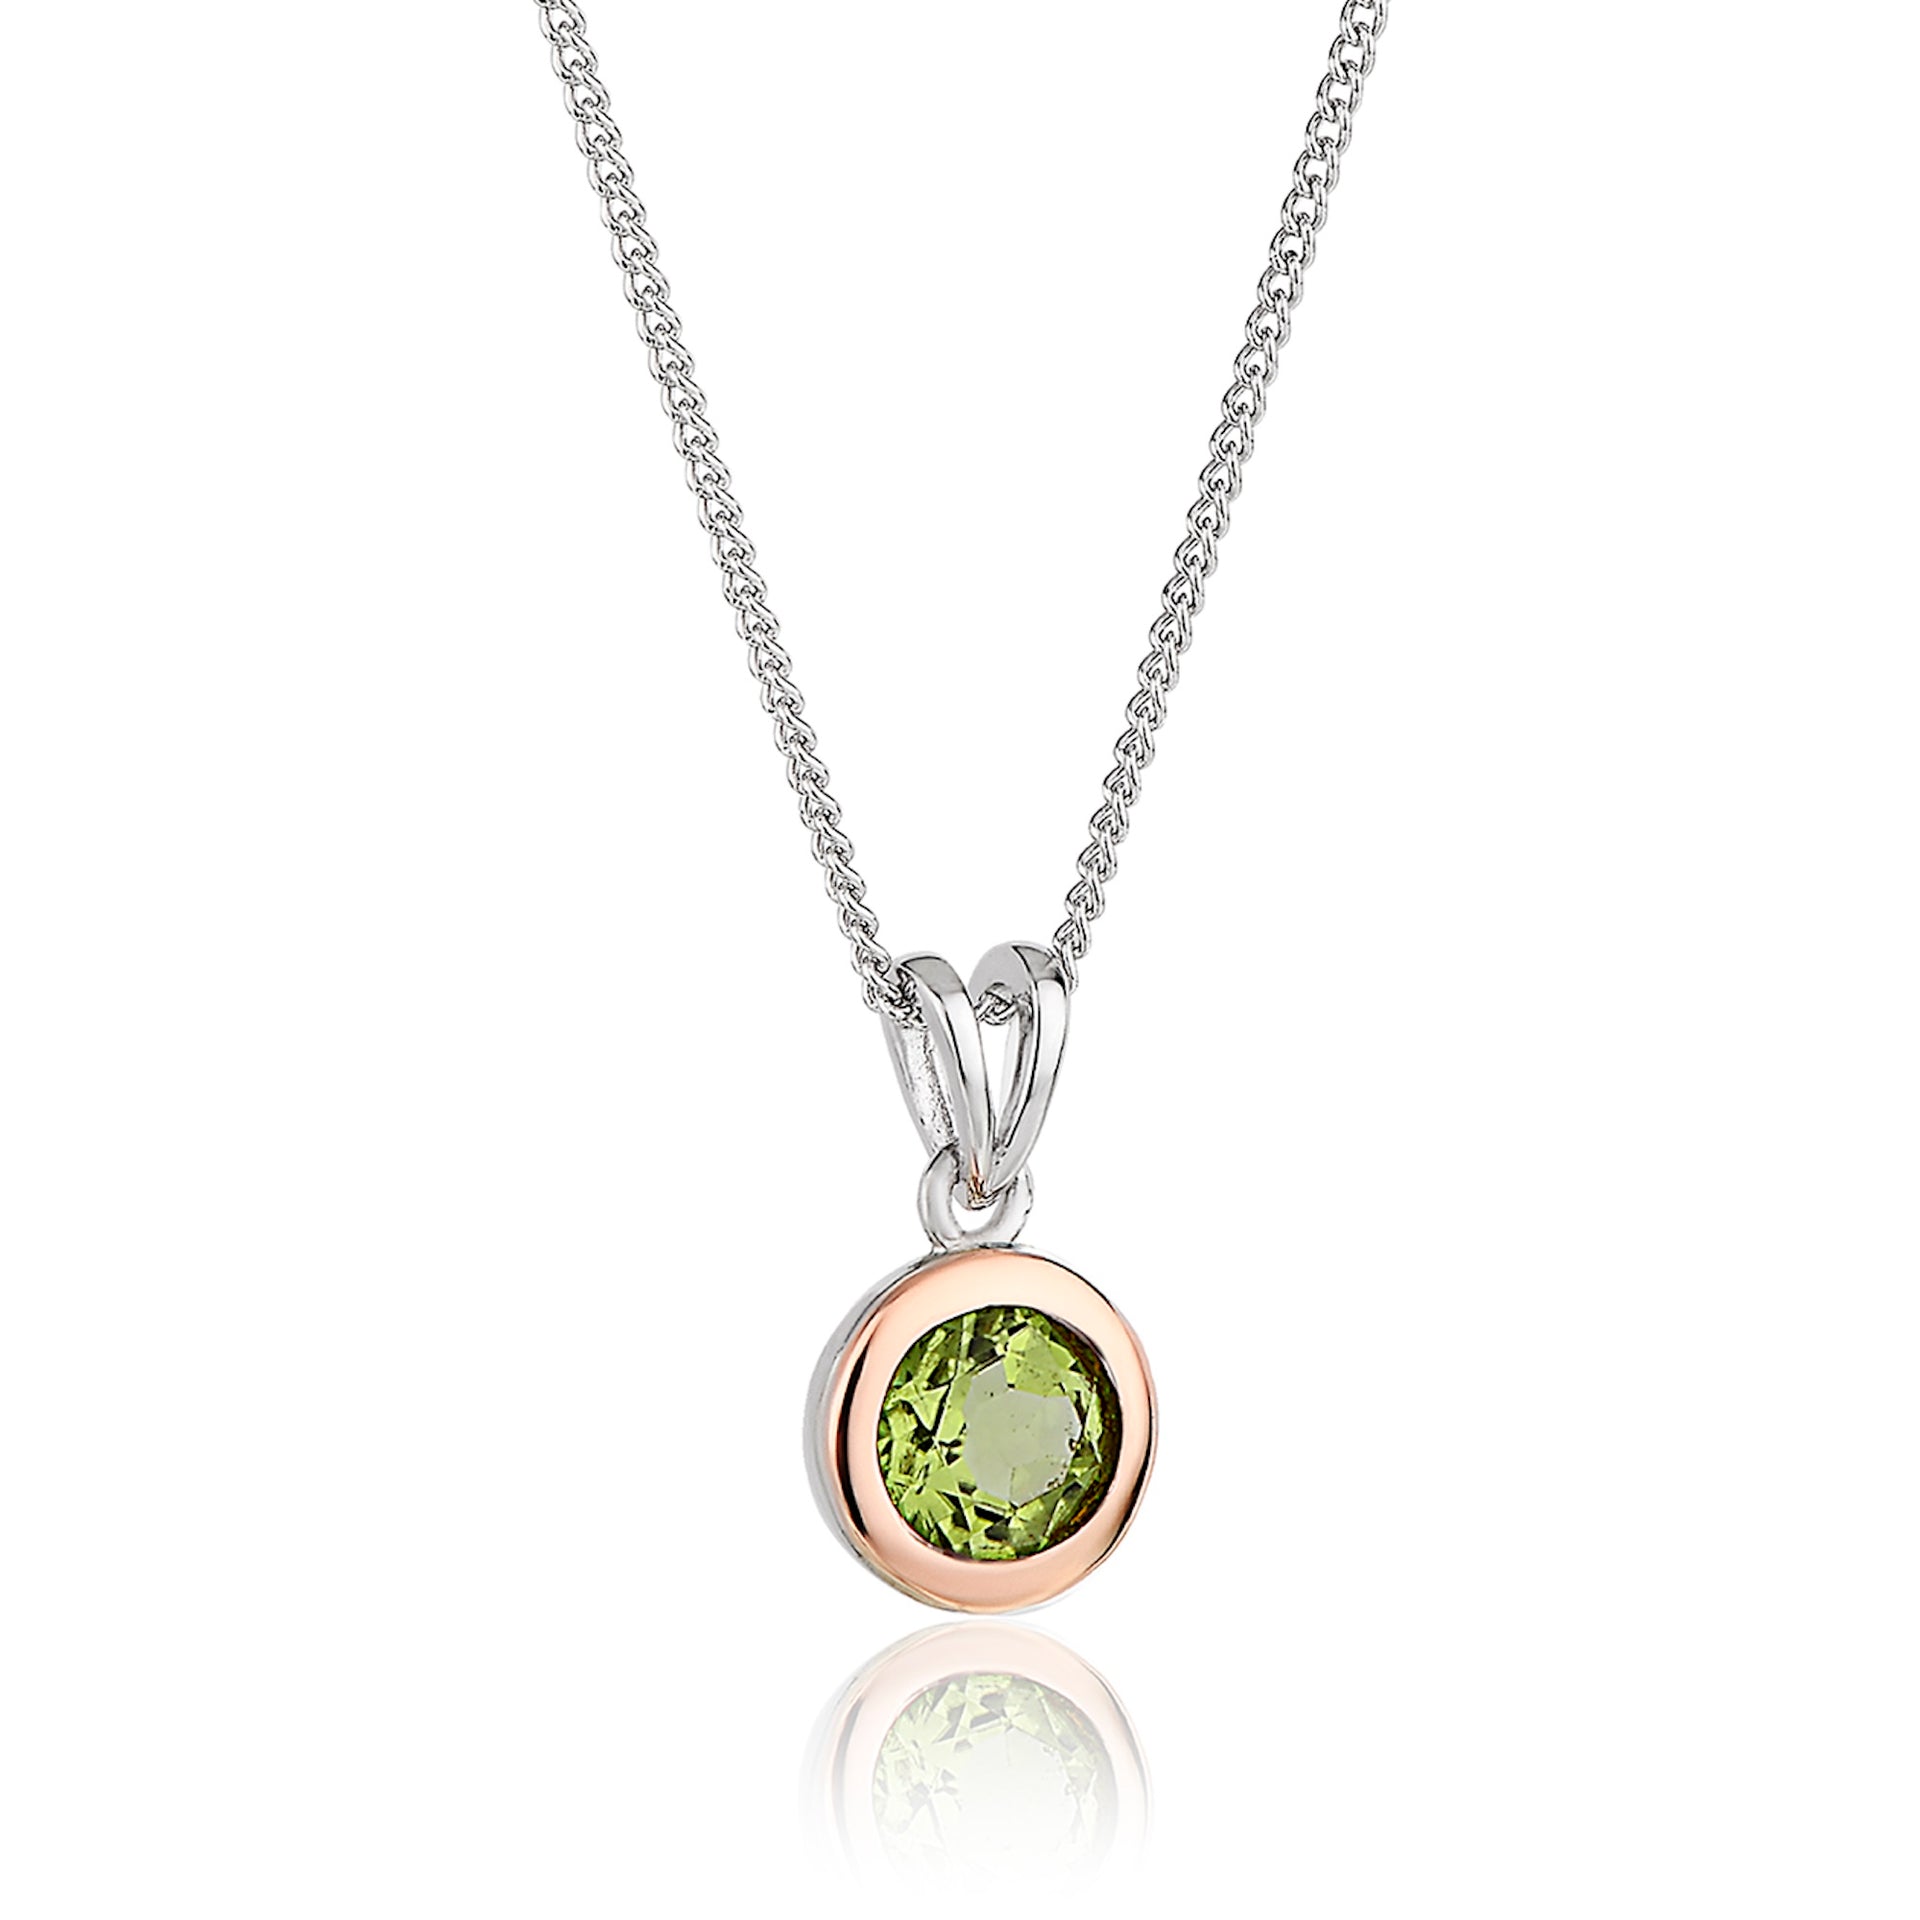 August Birthstone Silver and Peridot Pendant